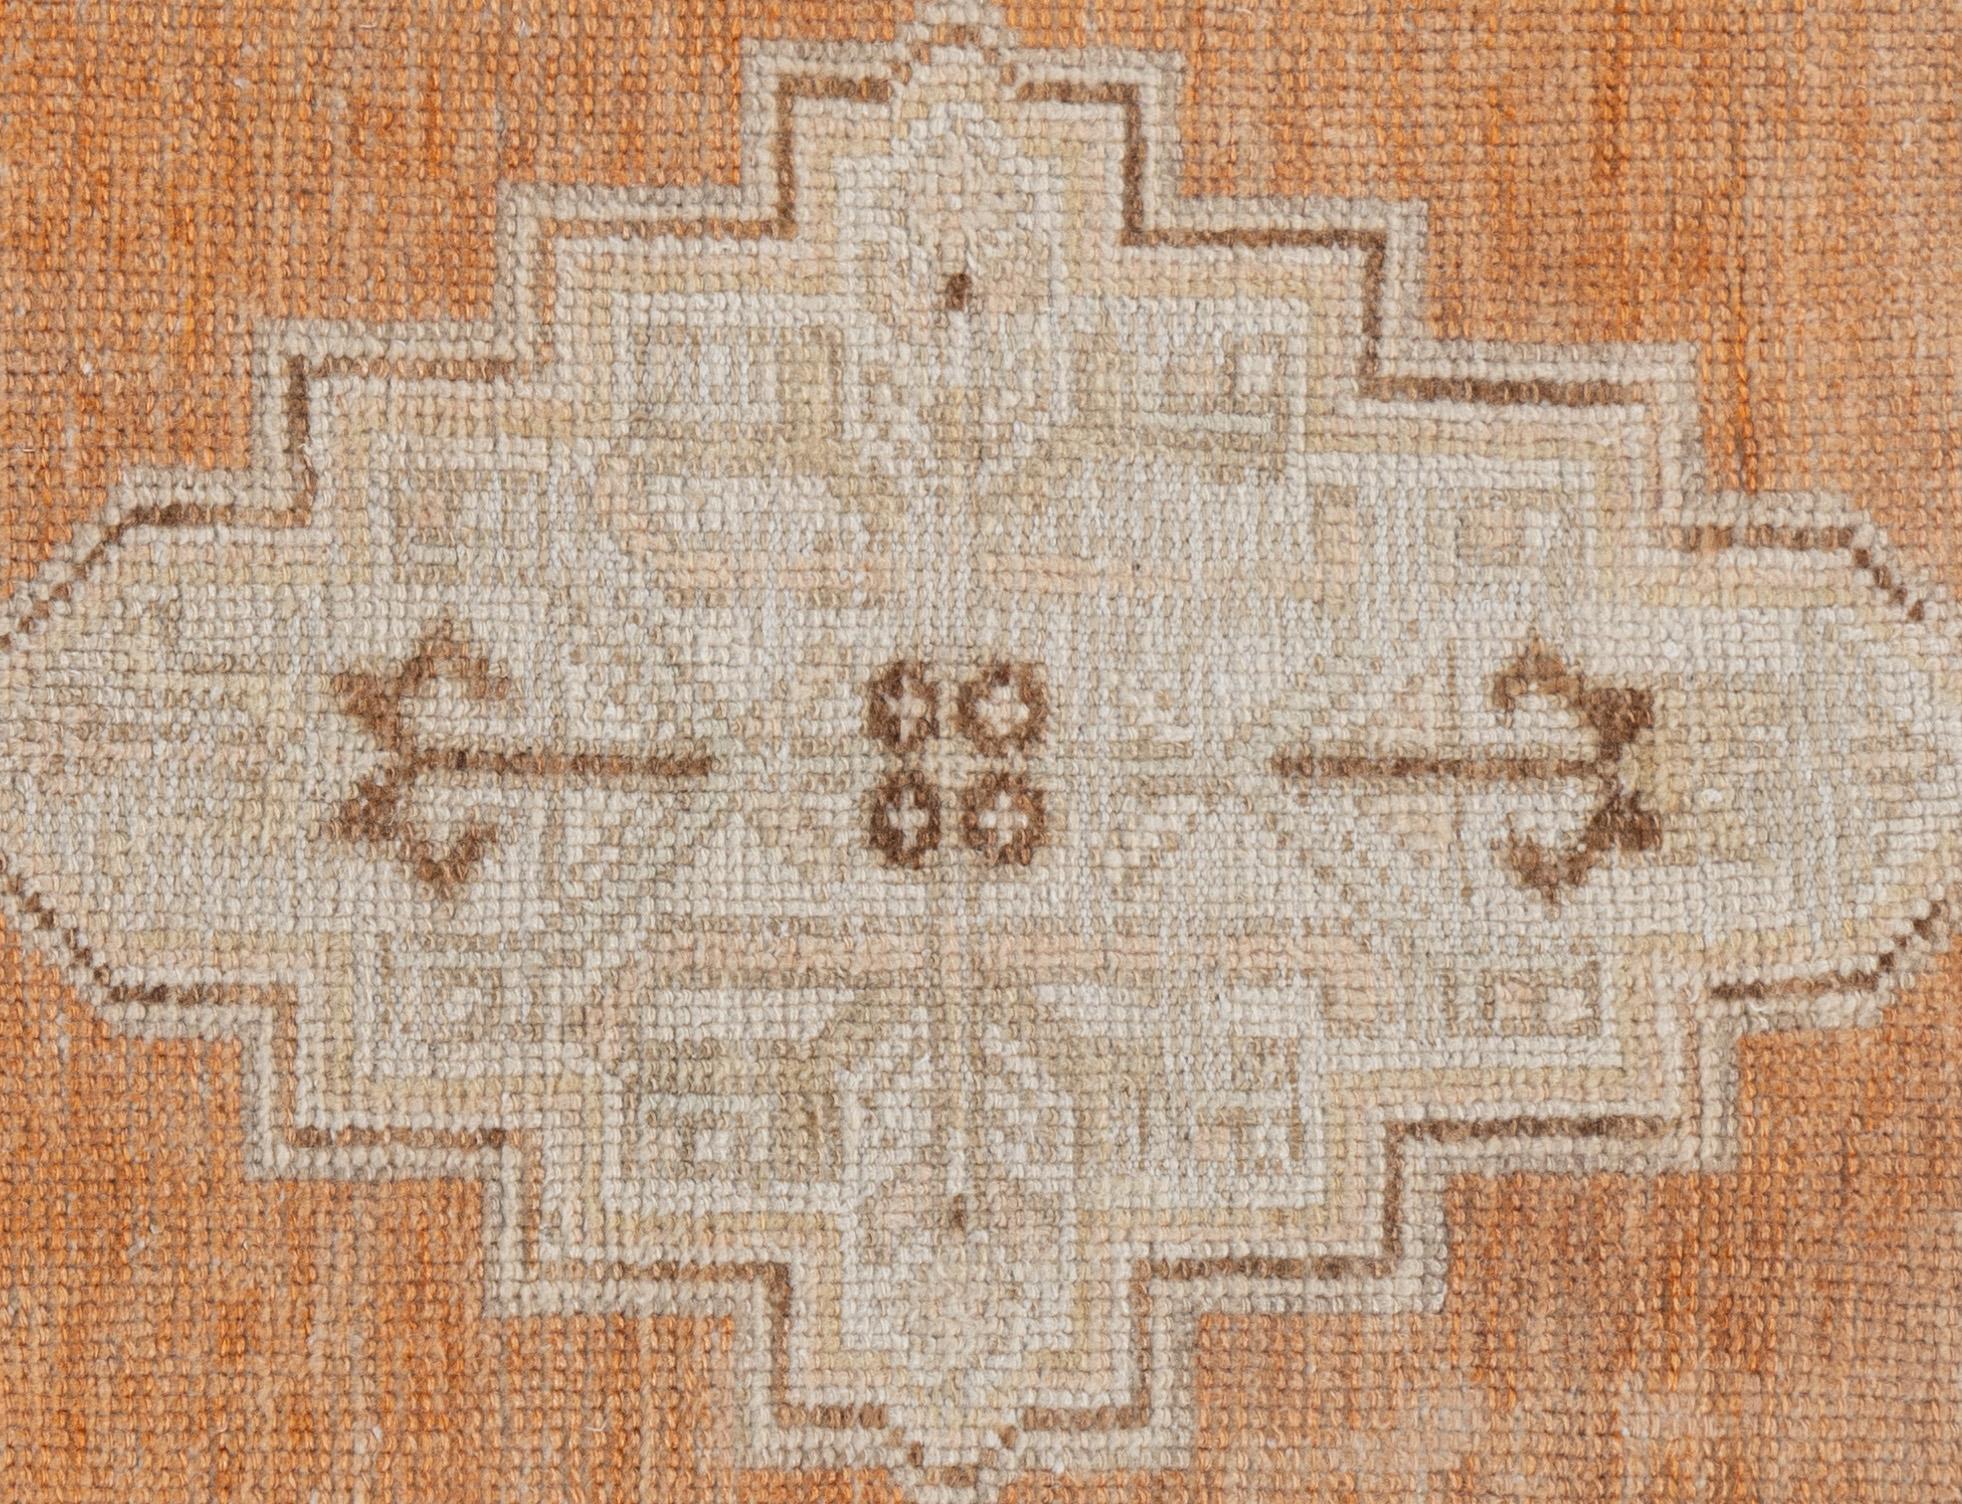 Vintage Turkish Oushak Runner 2'11 X 9'1. Oushak's are known for their soft palettes combined with eccentric drawing. Oushak in western Turkey has the longest continuous rug weaving history, stretching back at least to the mid-fifteenth century. It